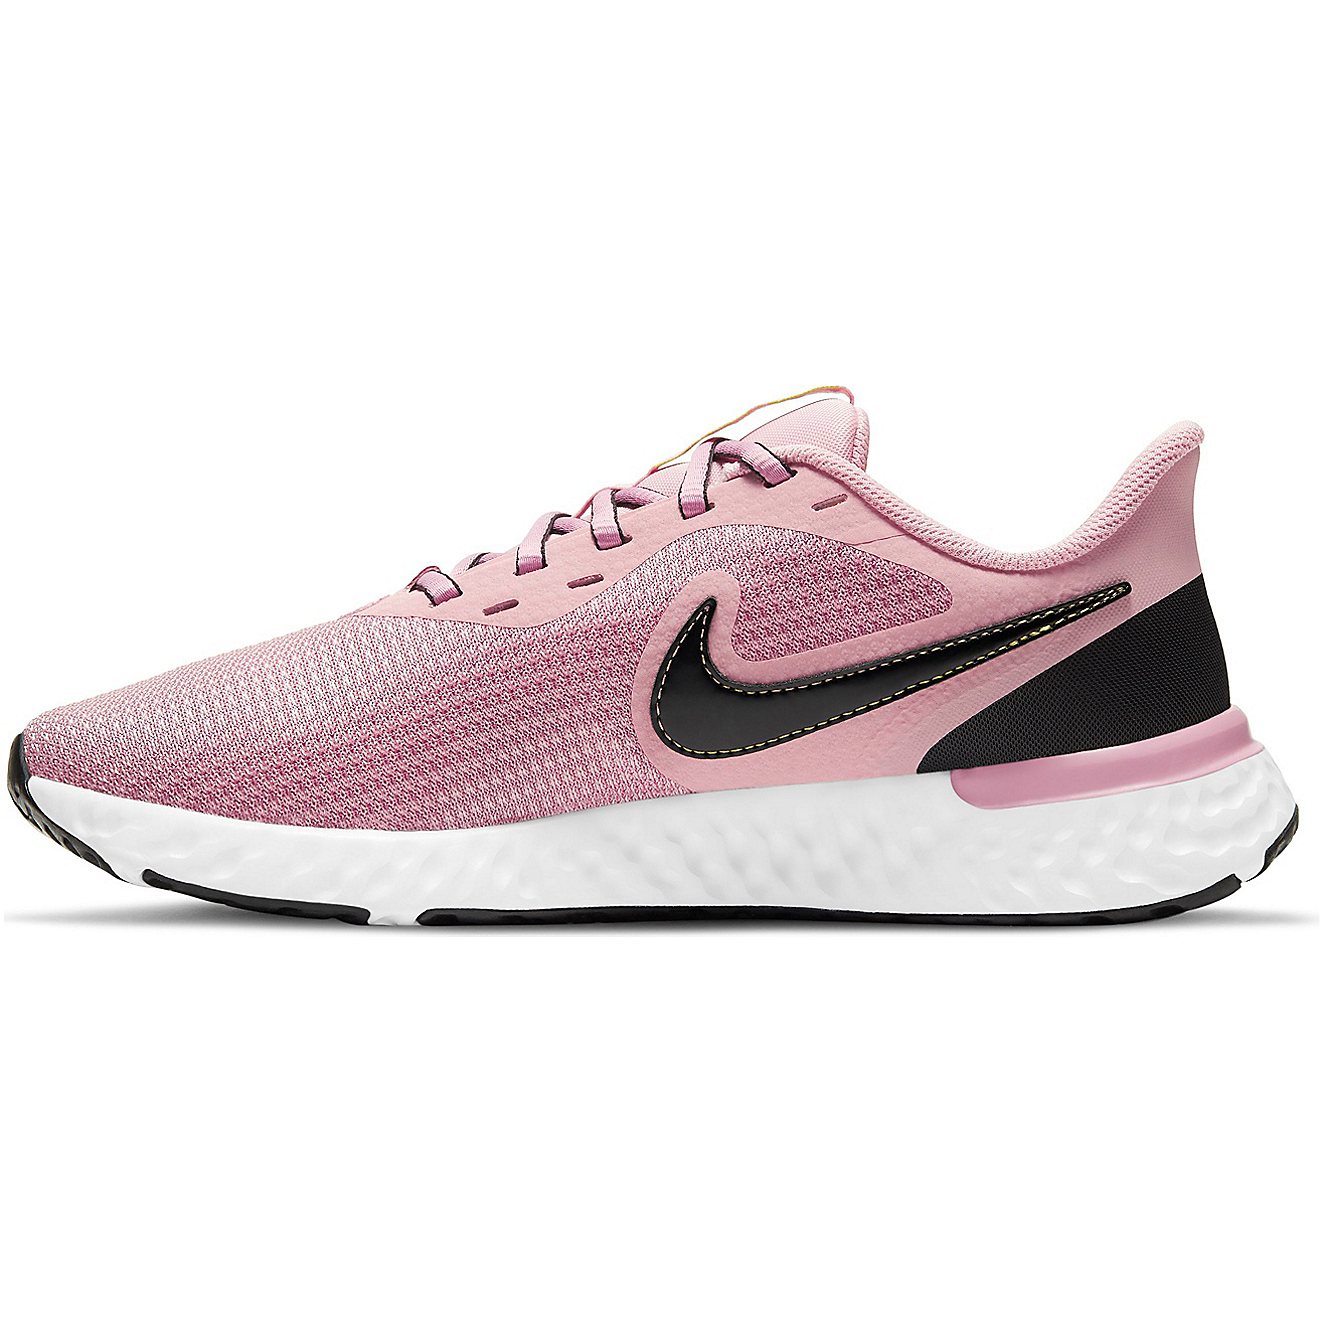 Nike Women's Revolution 5 Running Shoes                                                                                          - view number 4